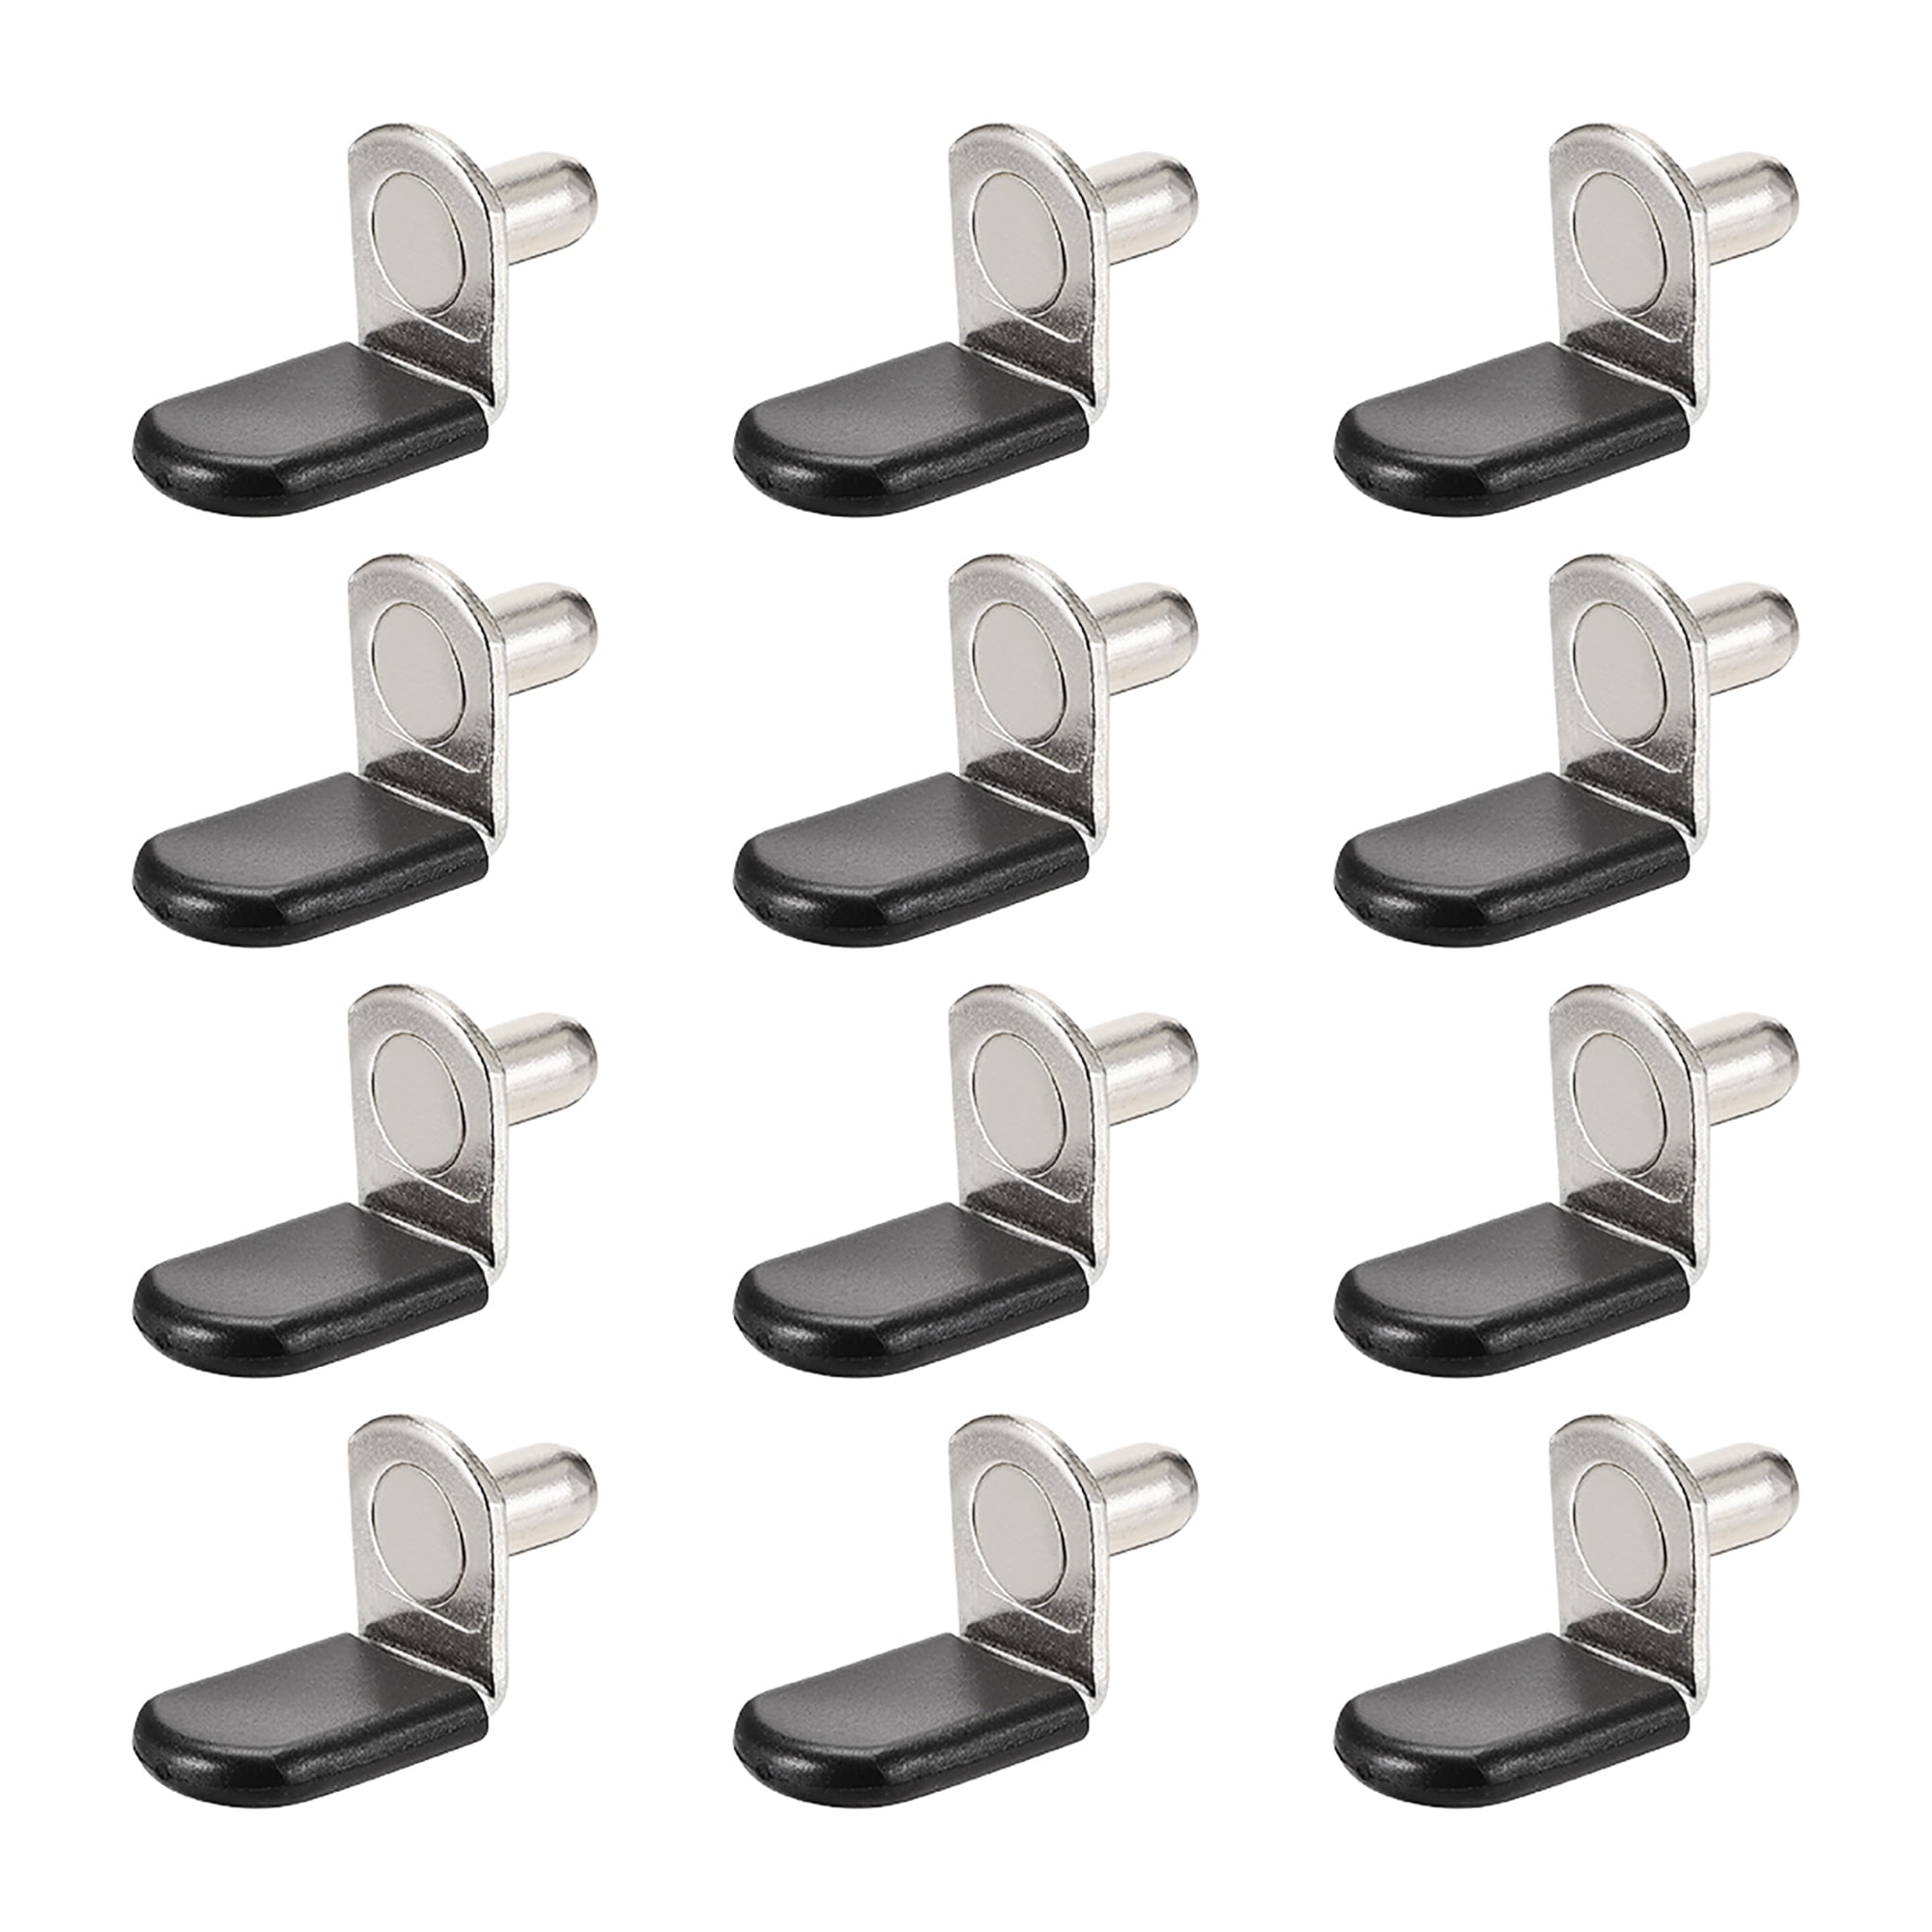 30Pcs Shelf Support Pegs 6mm L-Shaped Shelf Support for Furniture /& Bookcase Shelves Cabinet Closet Shelf Pins Support with Black Vinyl Sleeve Silver